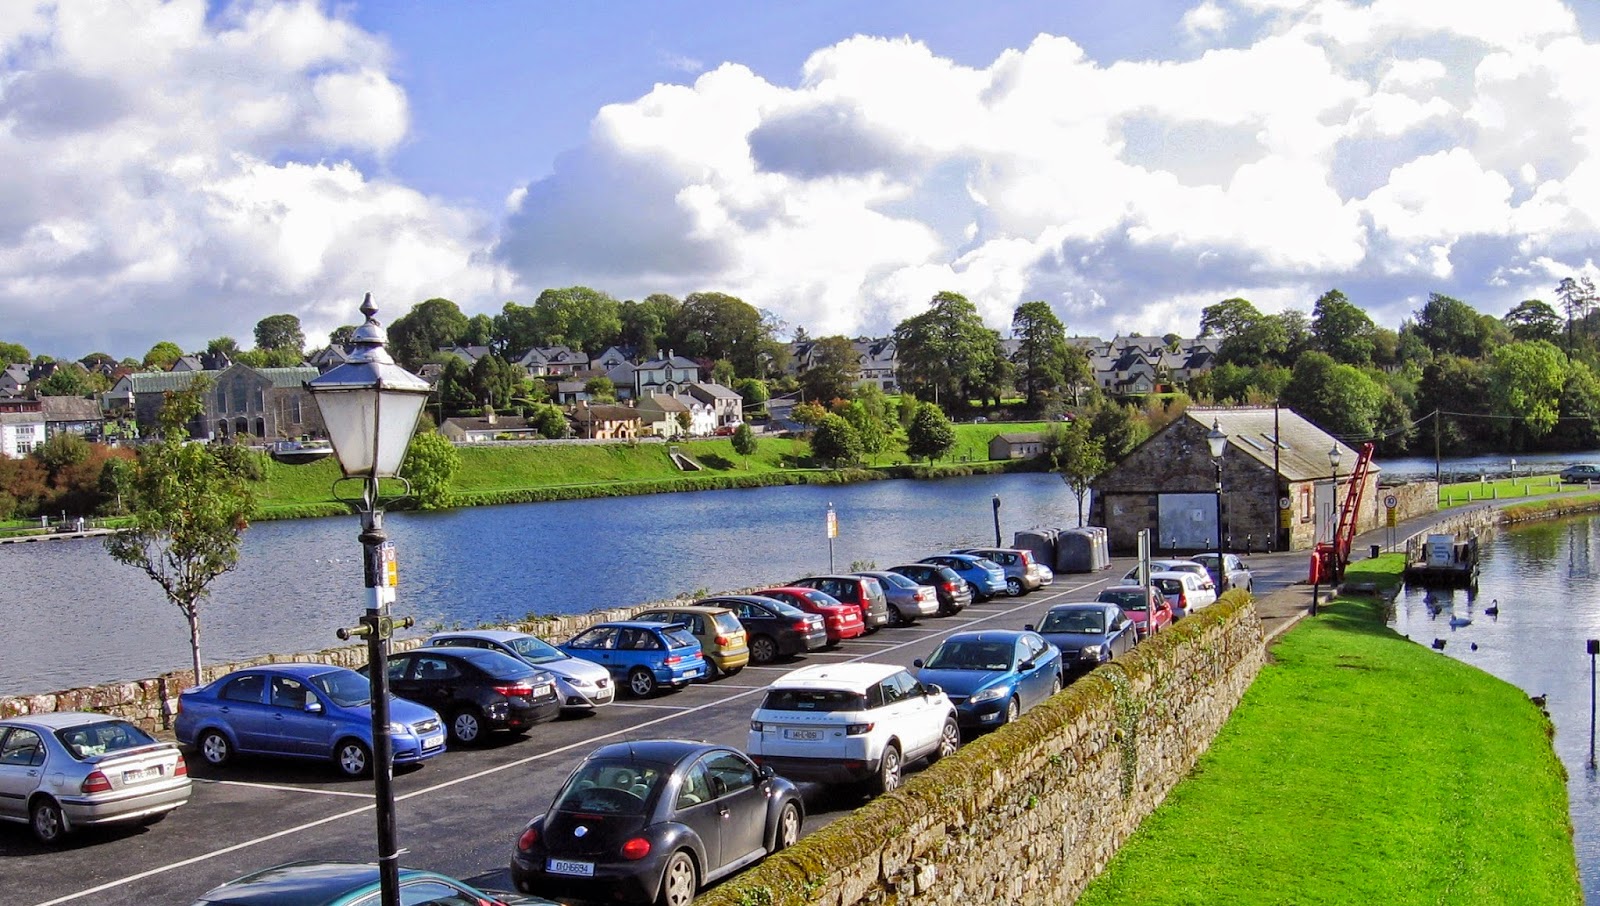 View of village of Ballina from across the River Shannon in County Clare